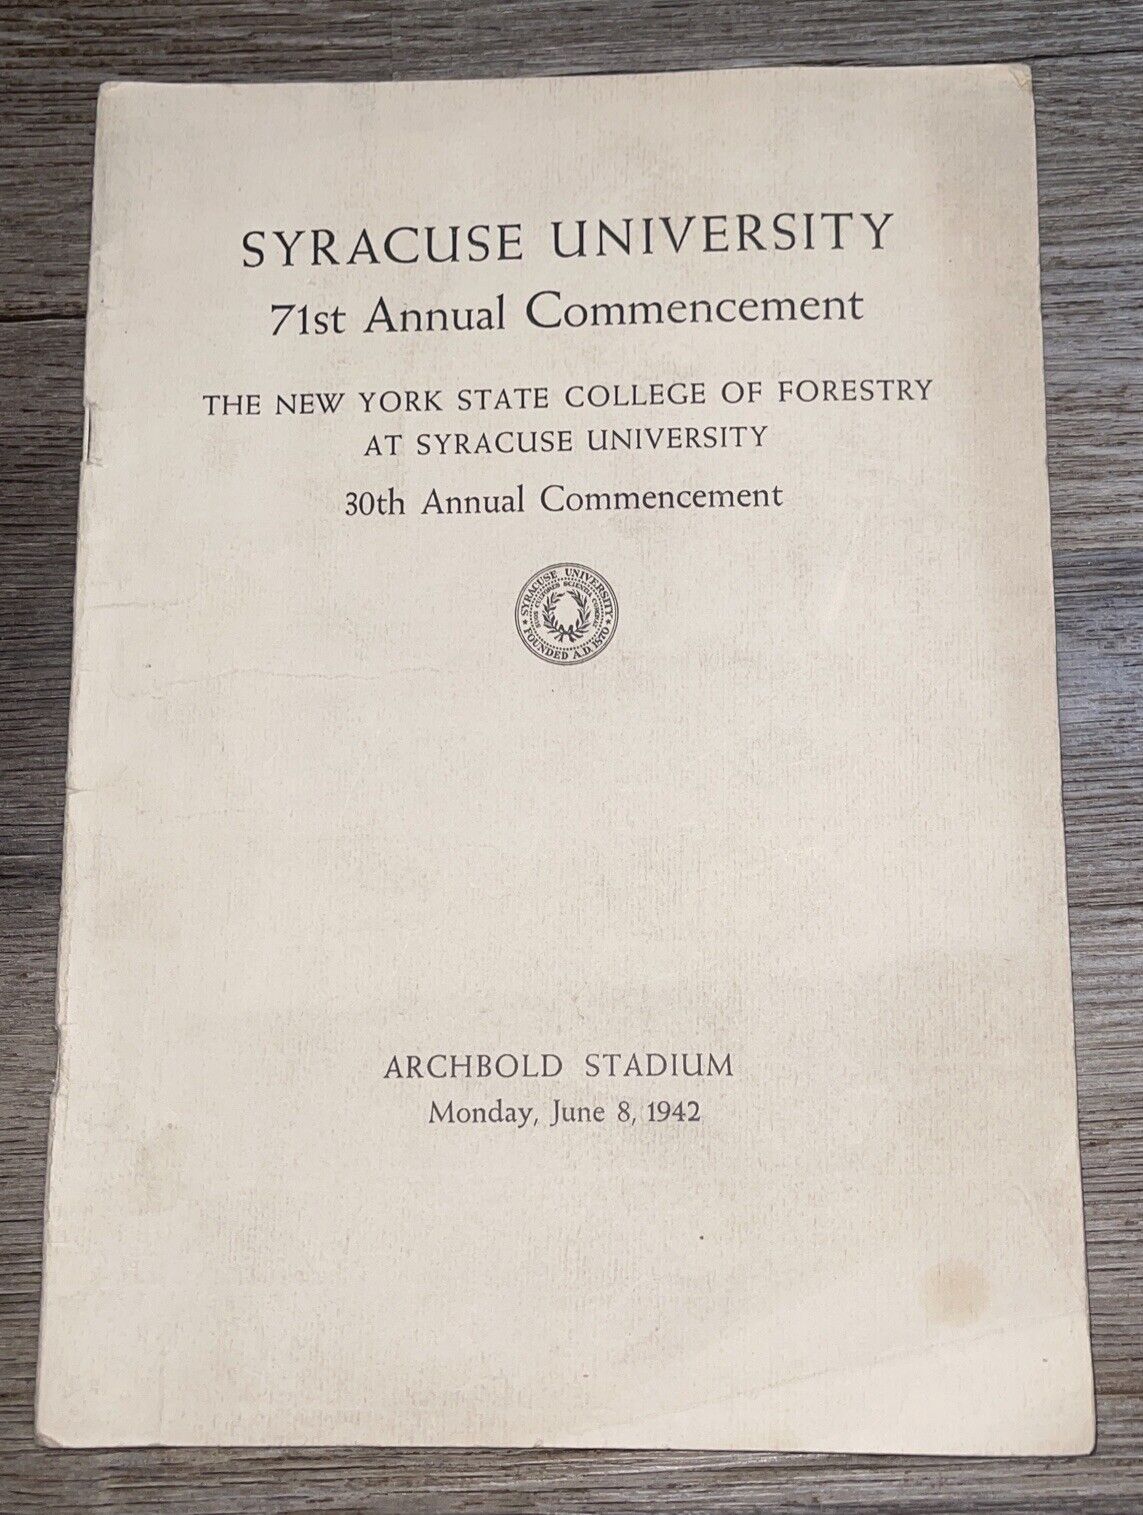 Syracuse University 71st Annual Commencement June 8th, 1942